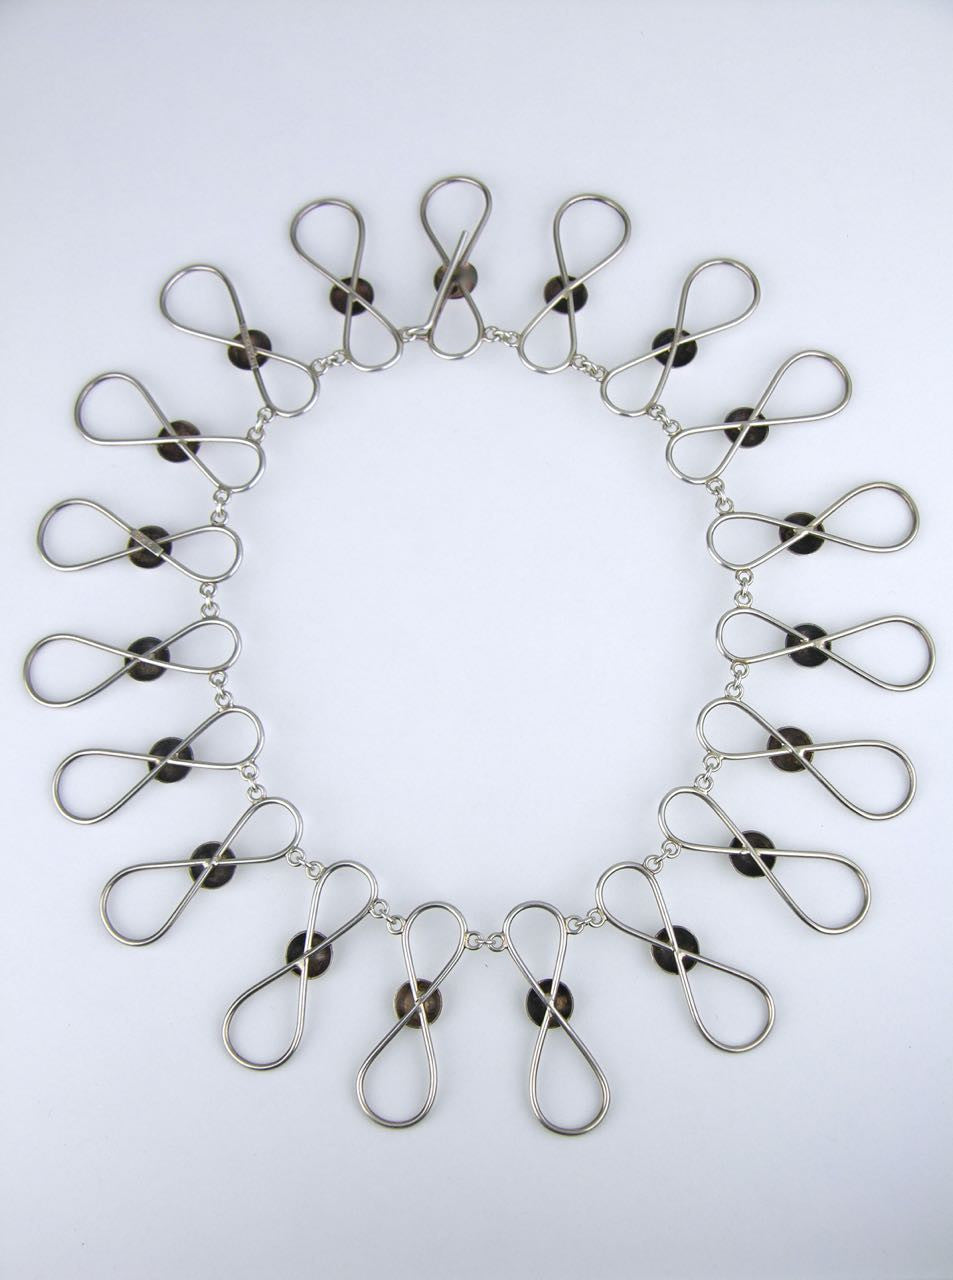 German Raebel silver "figure of eight" and dot collar necklace